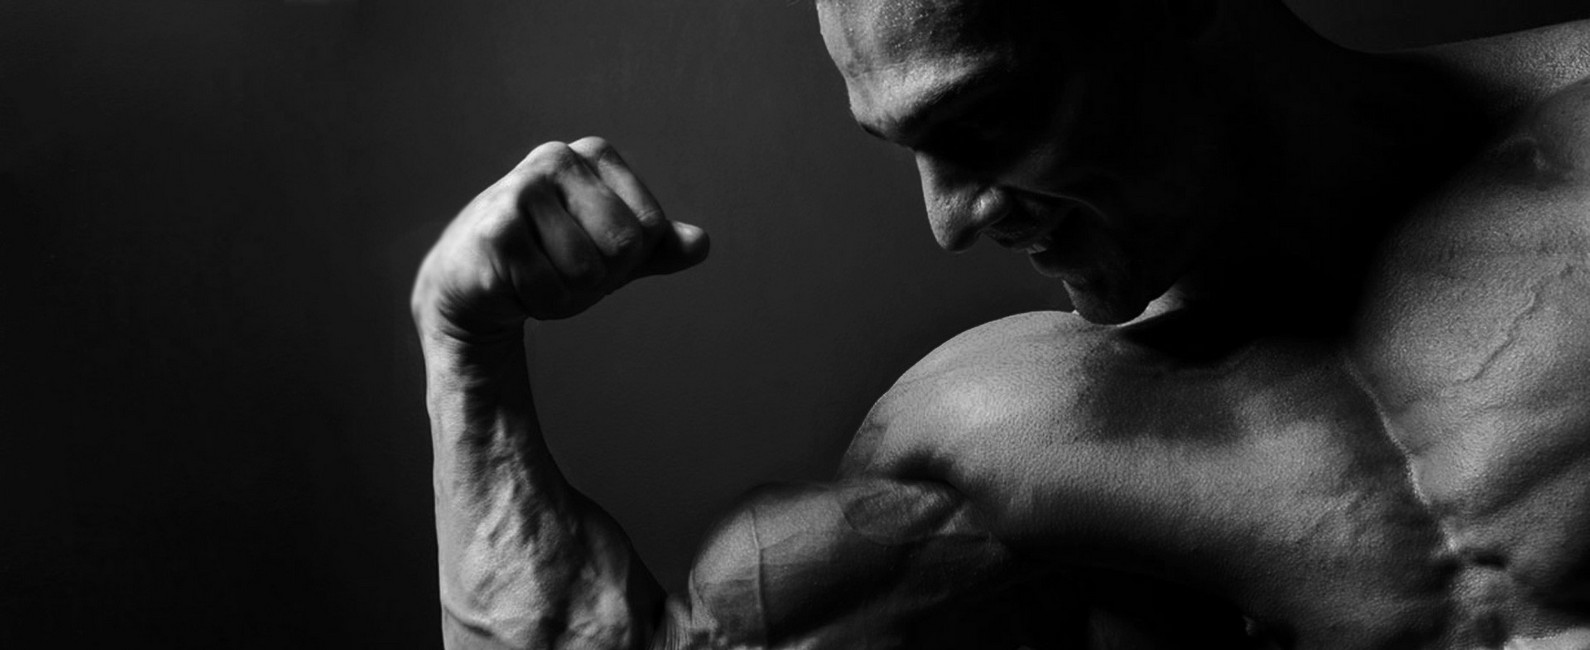 Shop for anabolic steroids